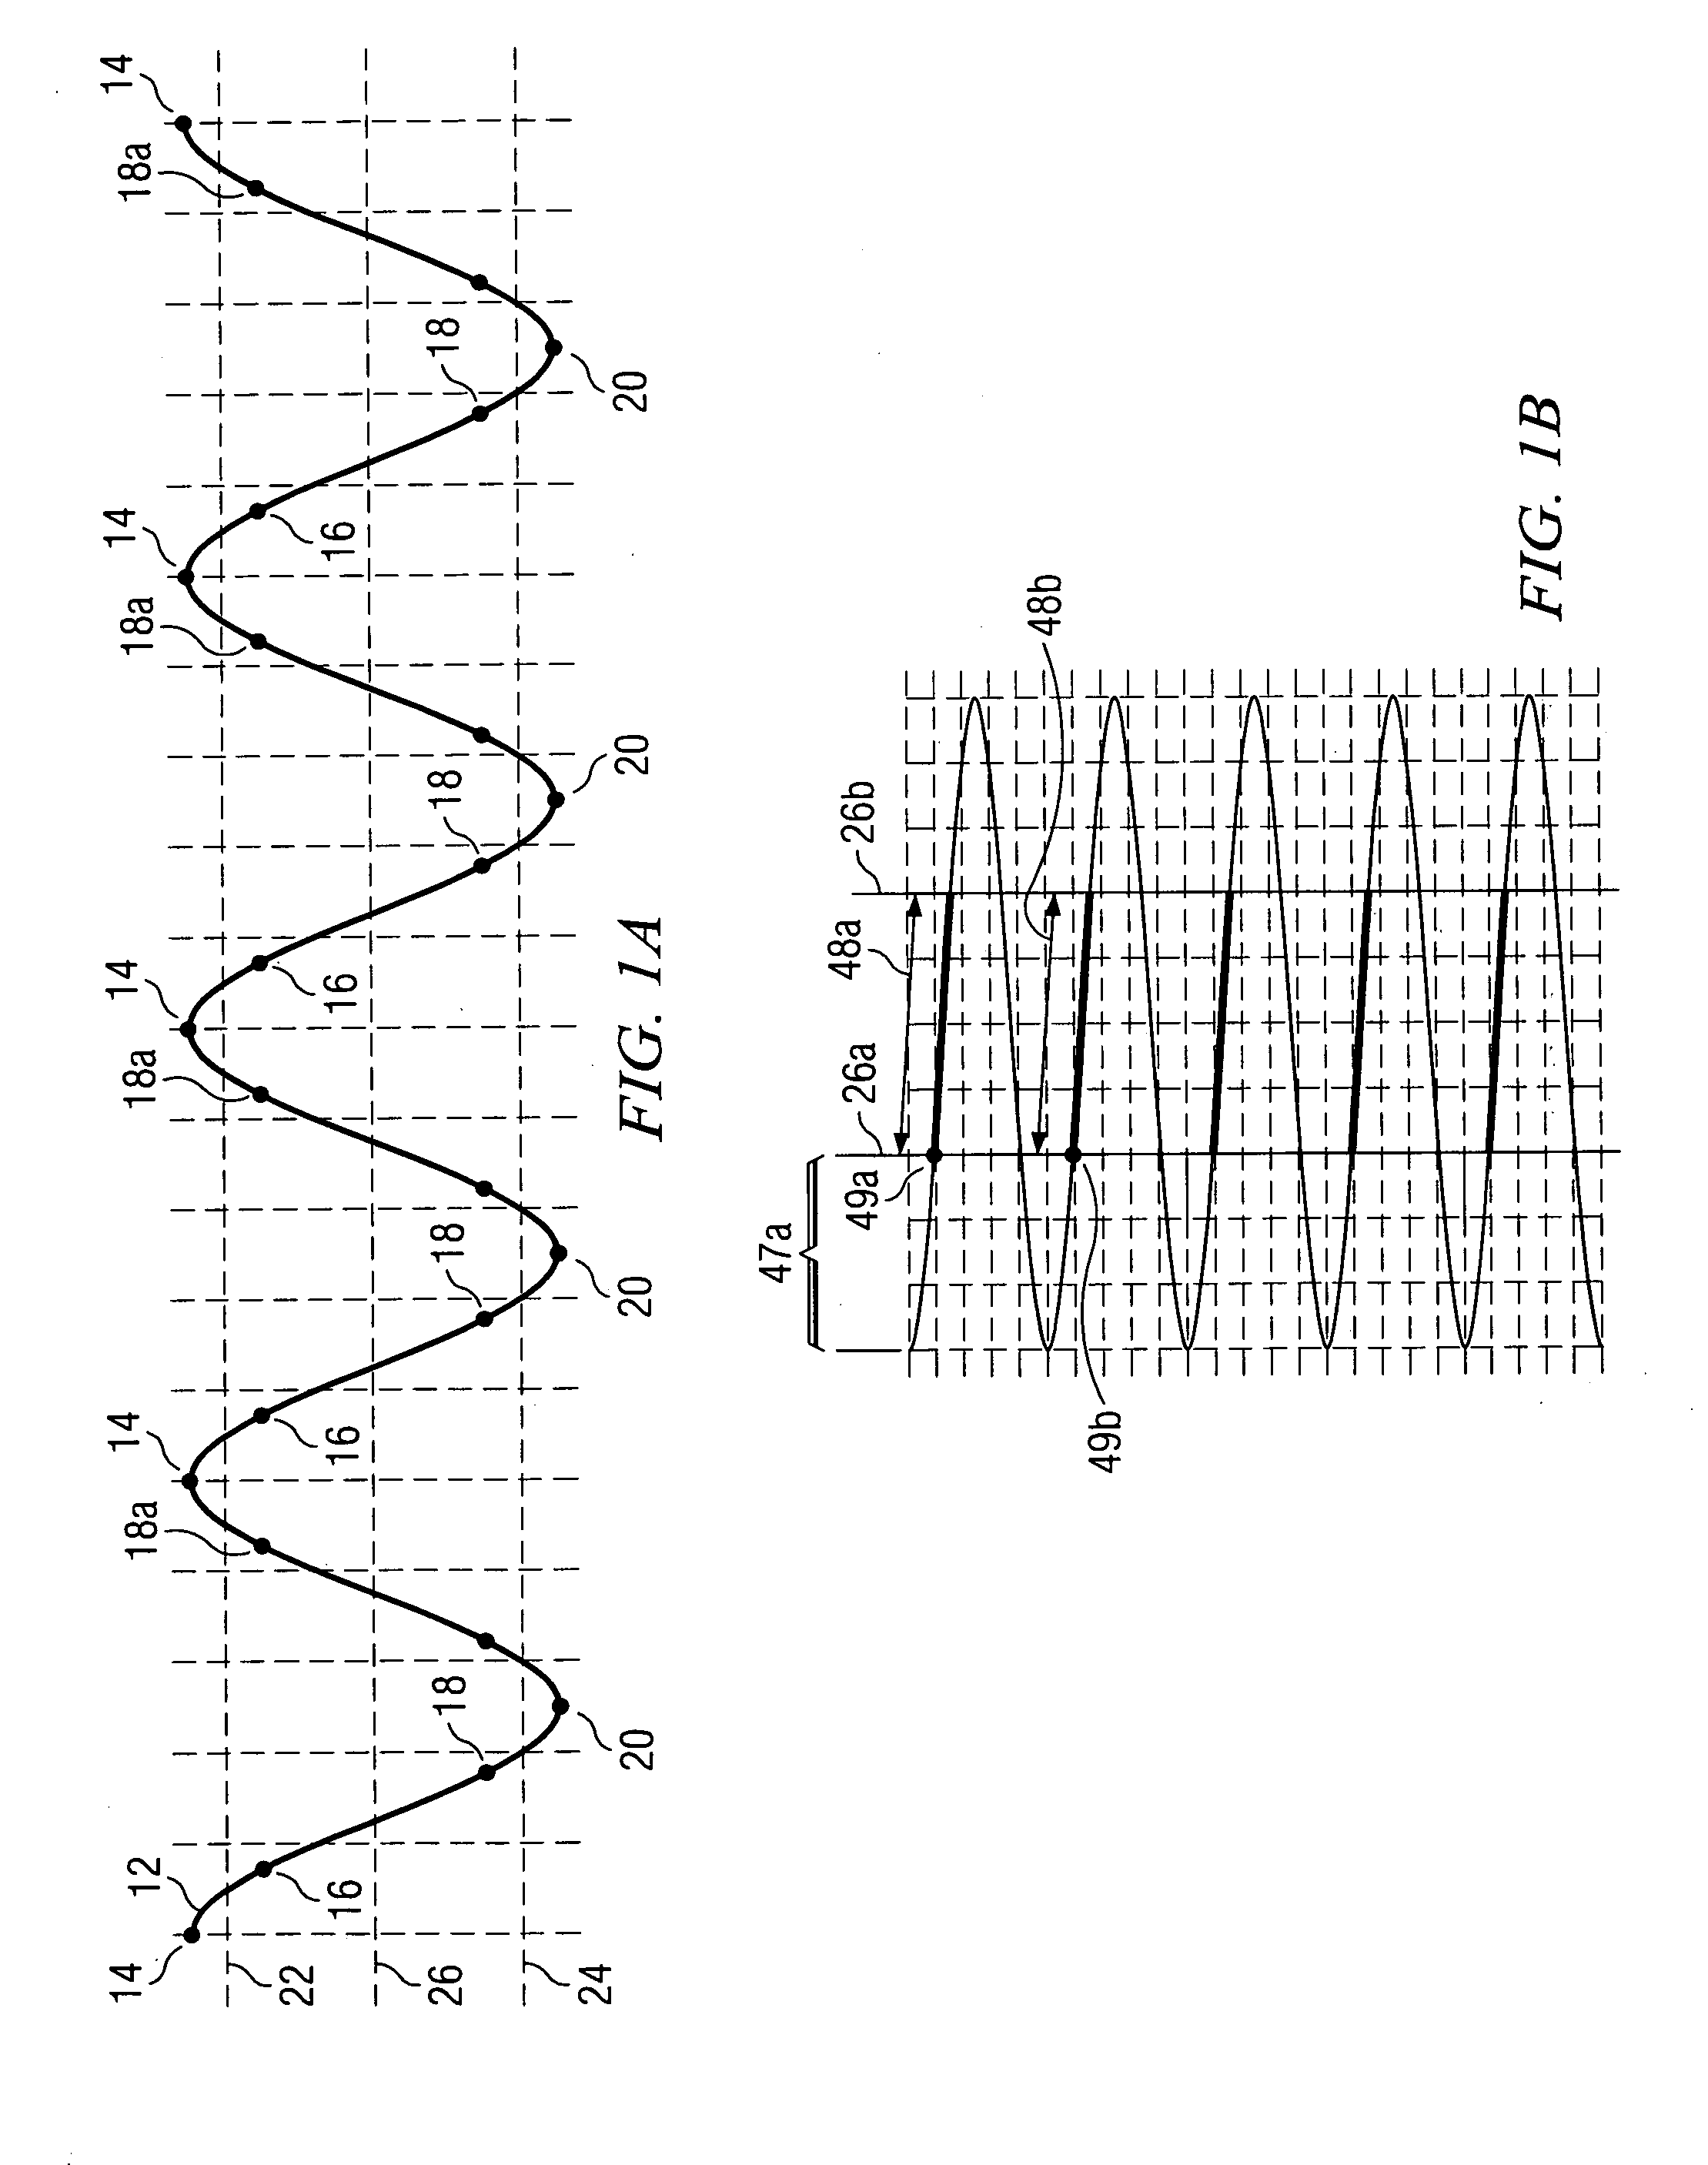 Method for maintaining the phase difference of a positioning mirror as a constant with respect to a high speed resonant mirror to generate high quality images